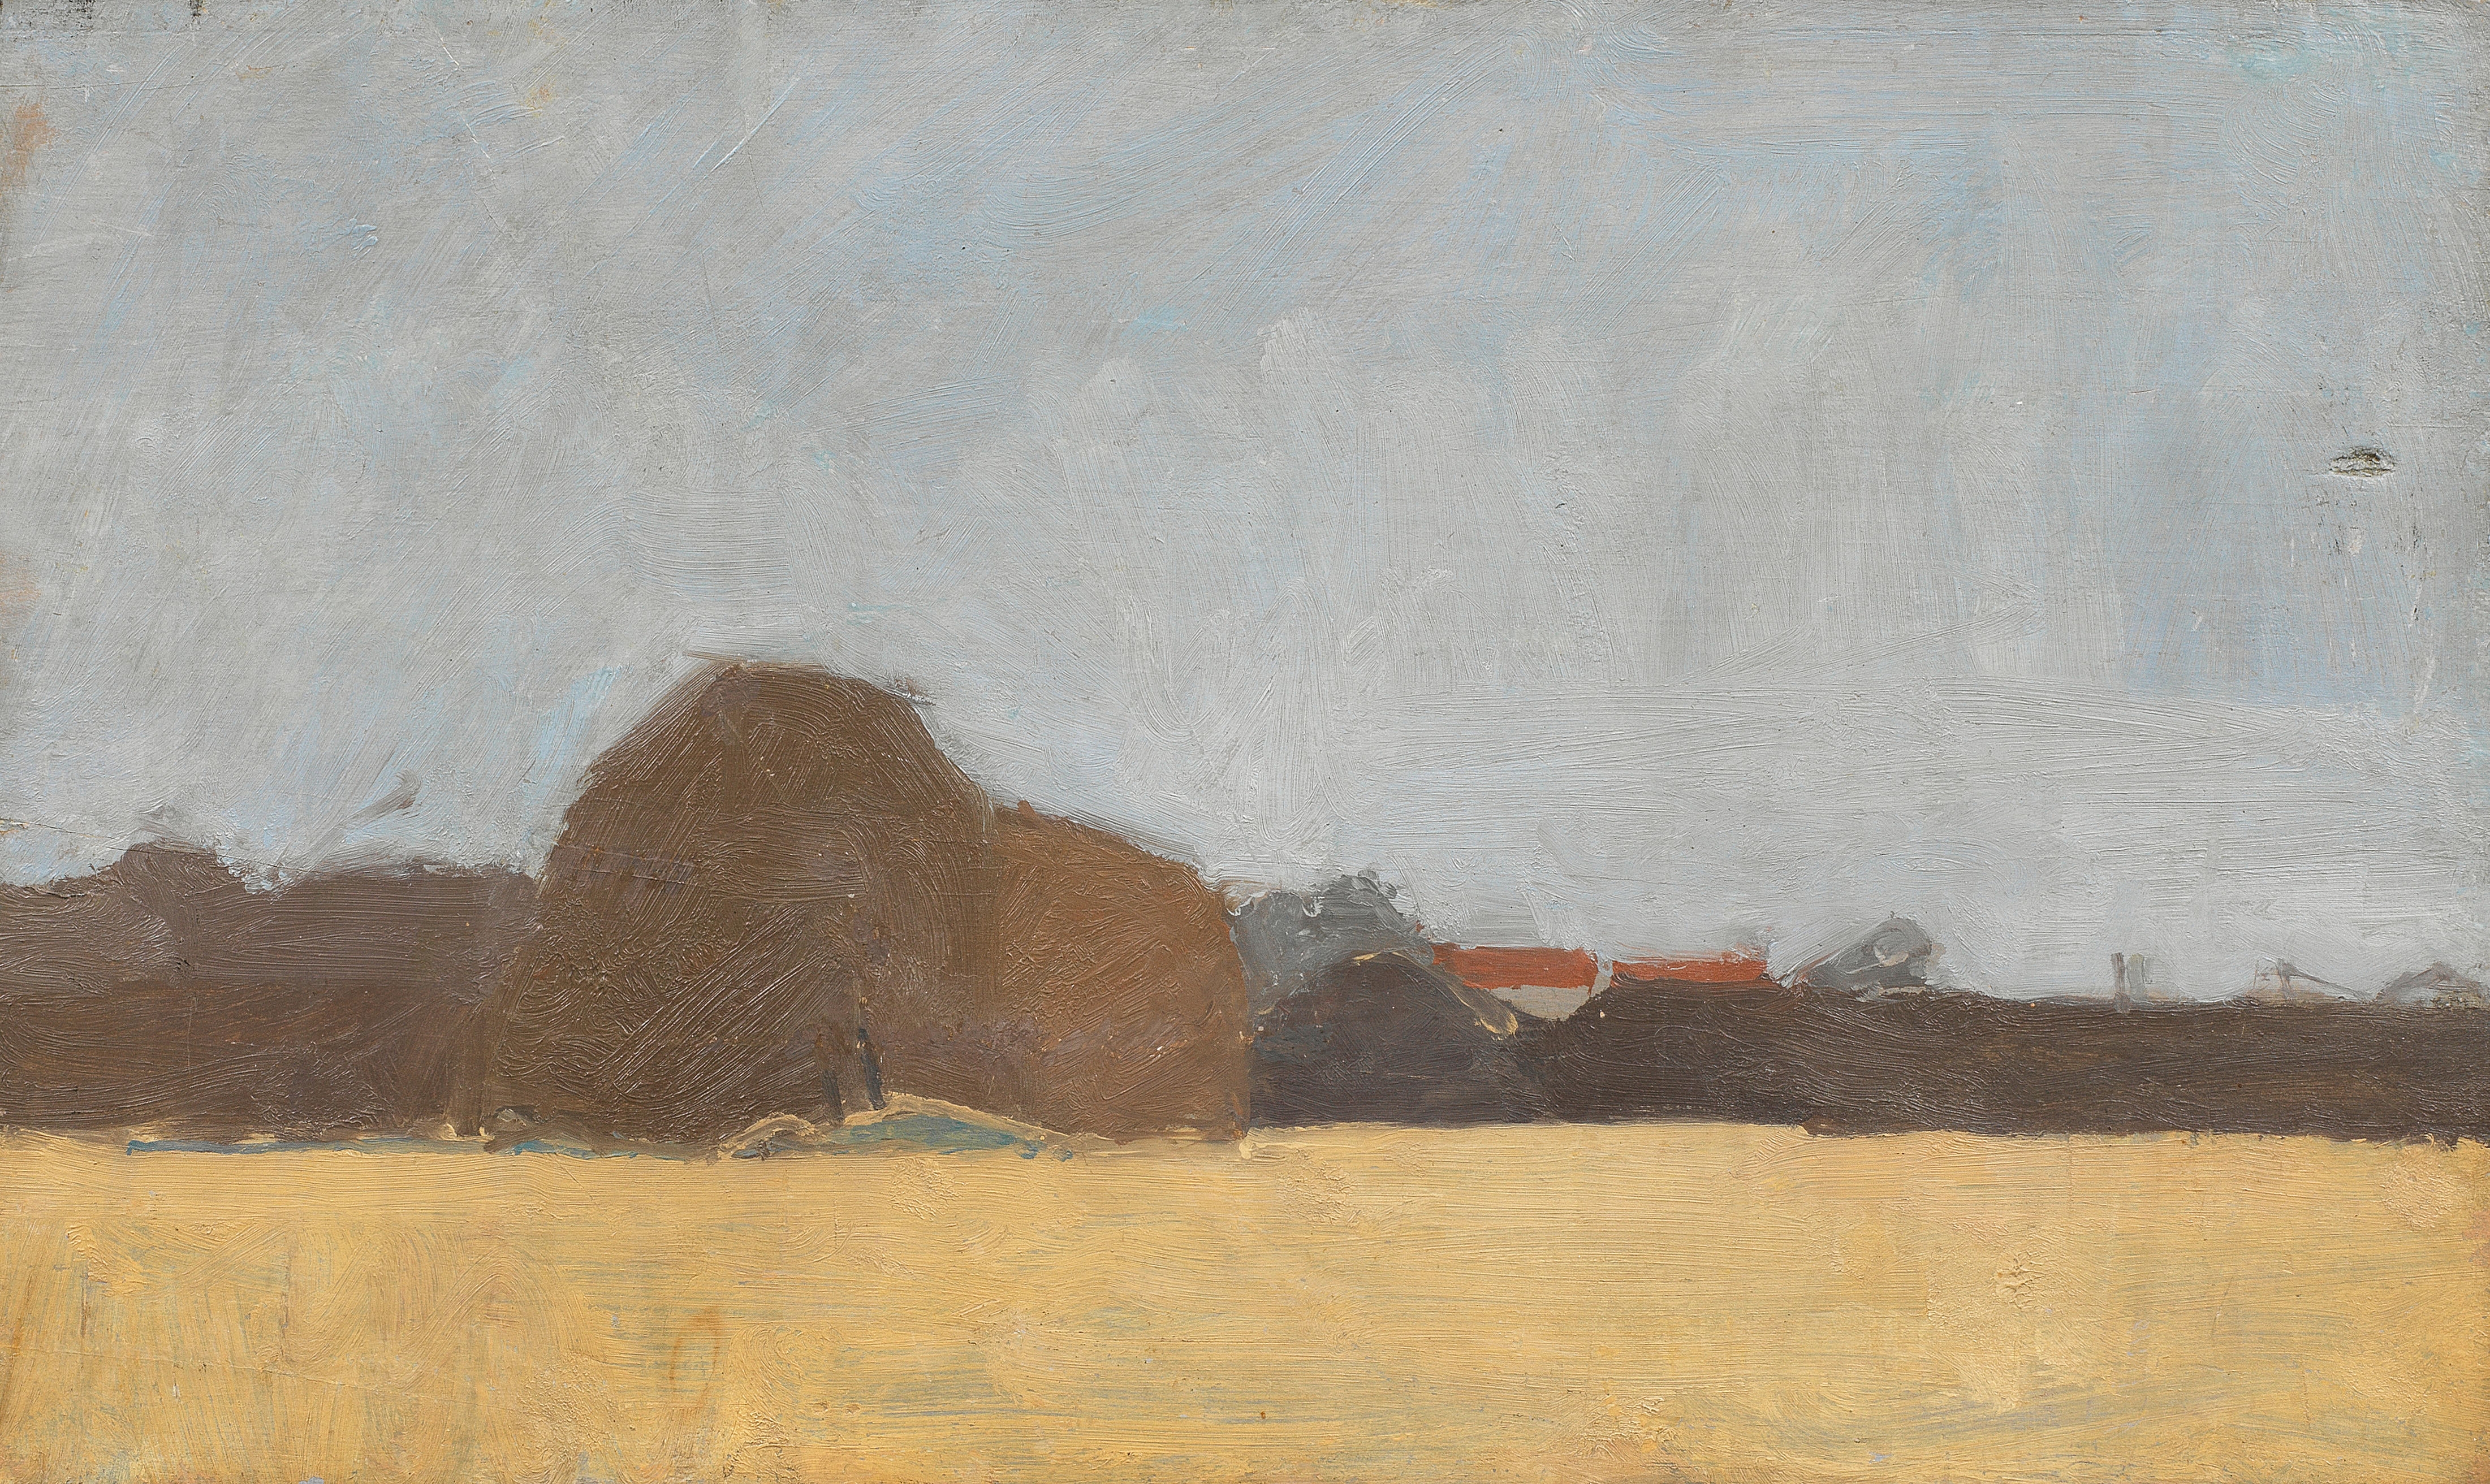 Landscape, Edge of Field by Euan Uglow, Painted circa 1960